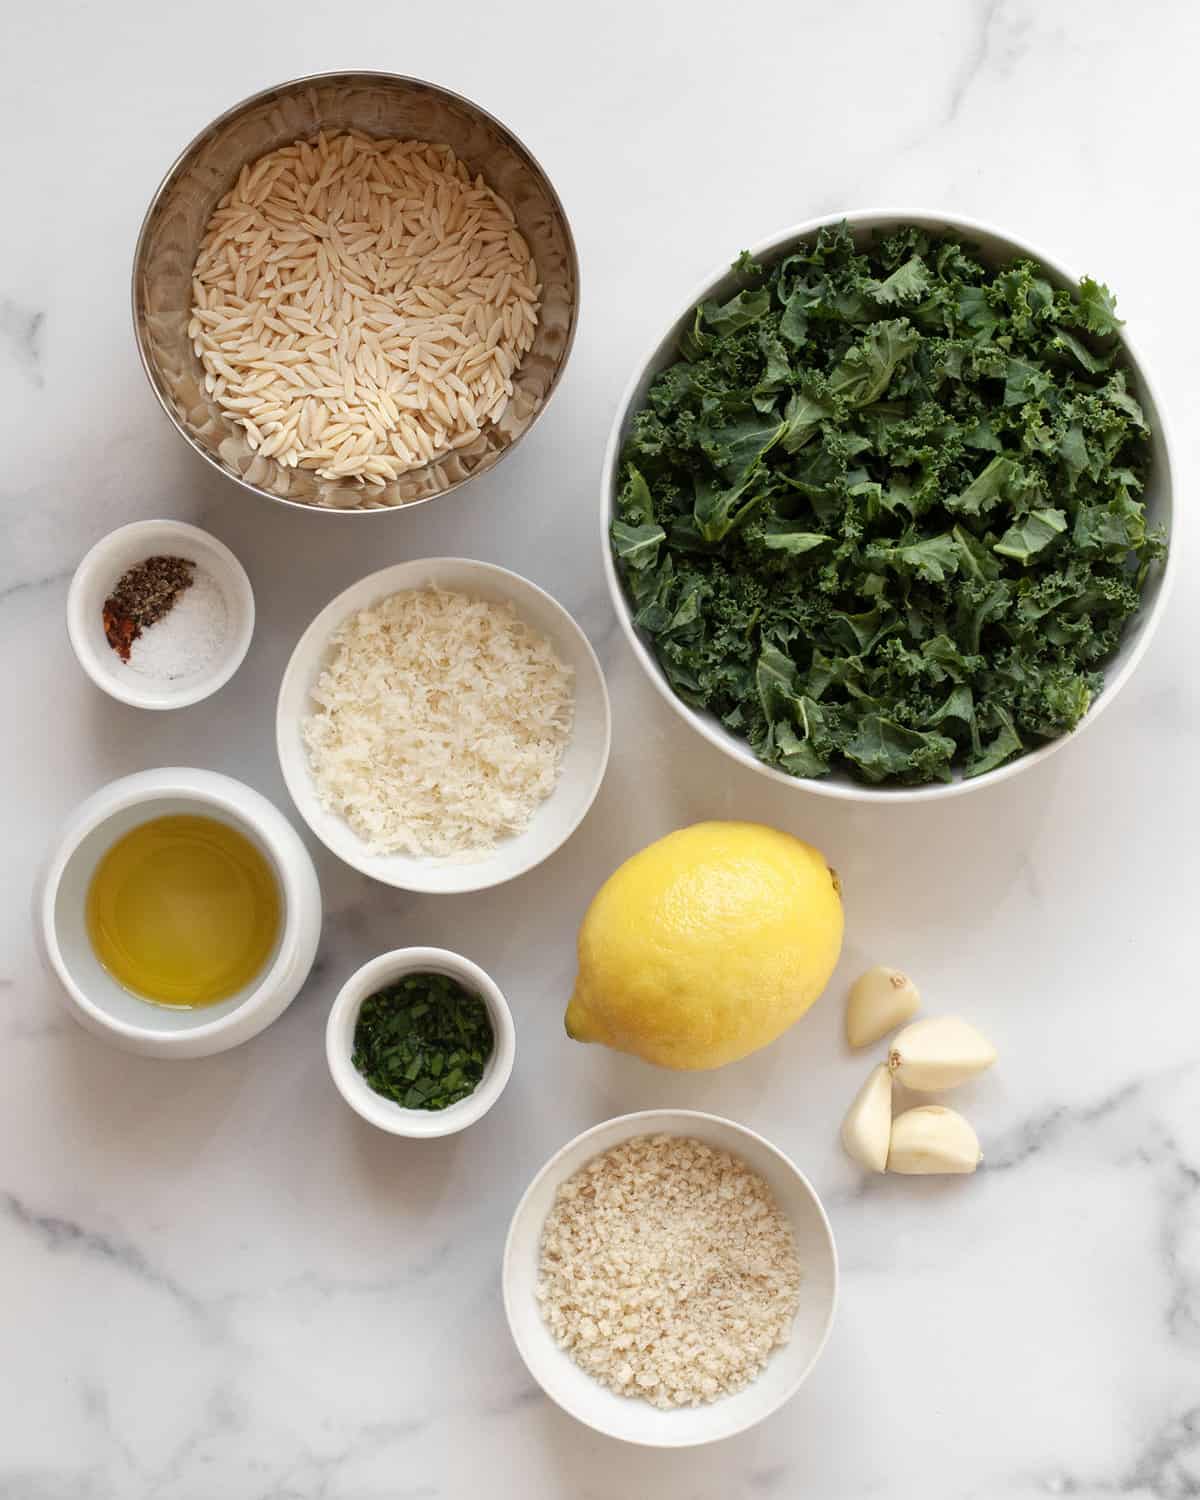 Ingredients including lemon, kale, orzo, breadcrumbs, olive oil, pecorino, parsley and spices.